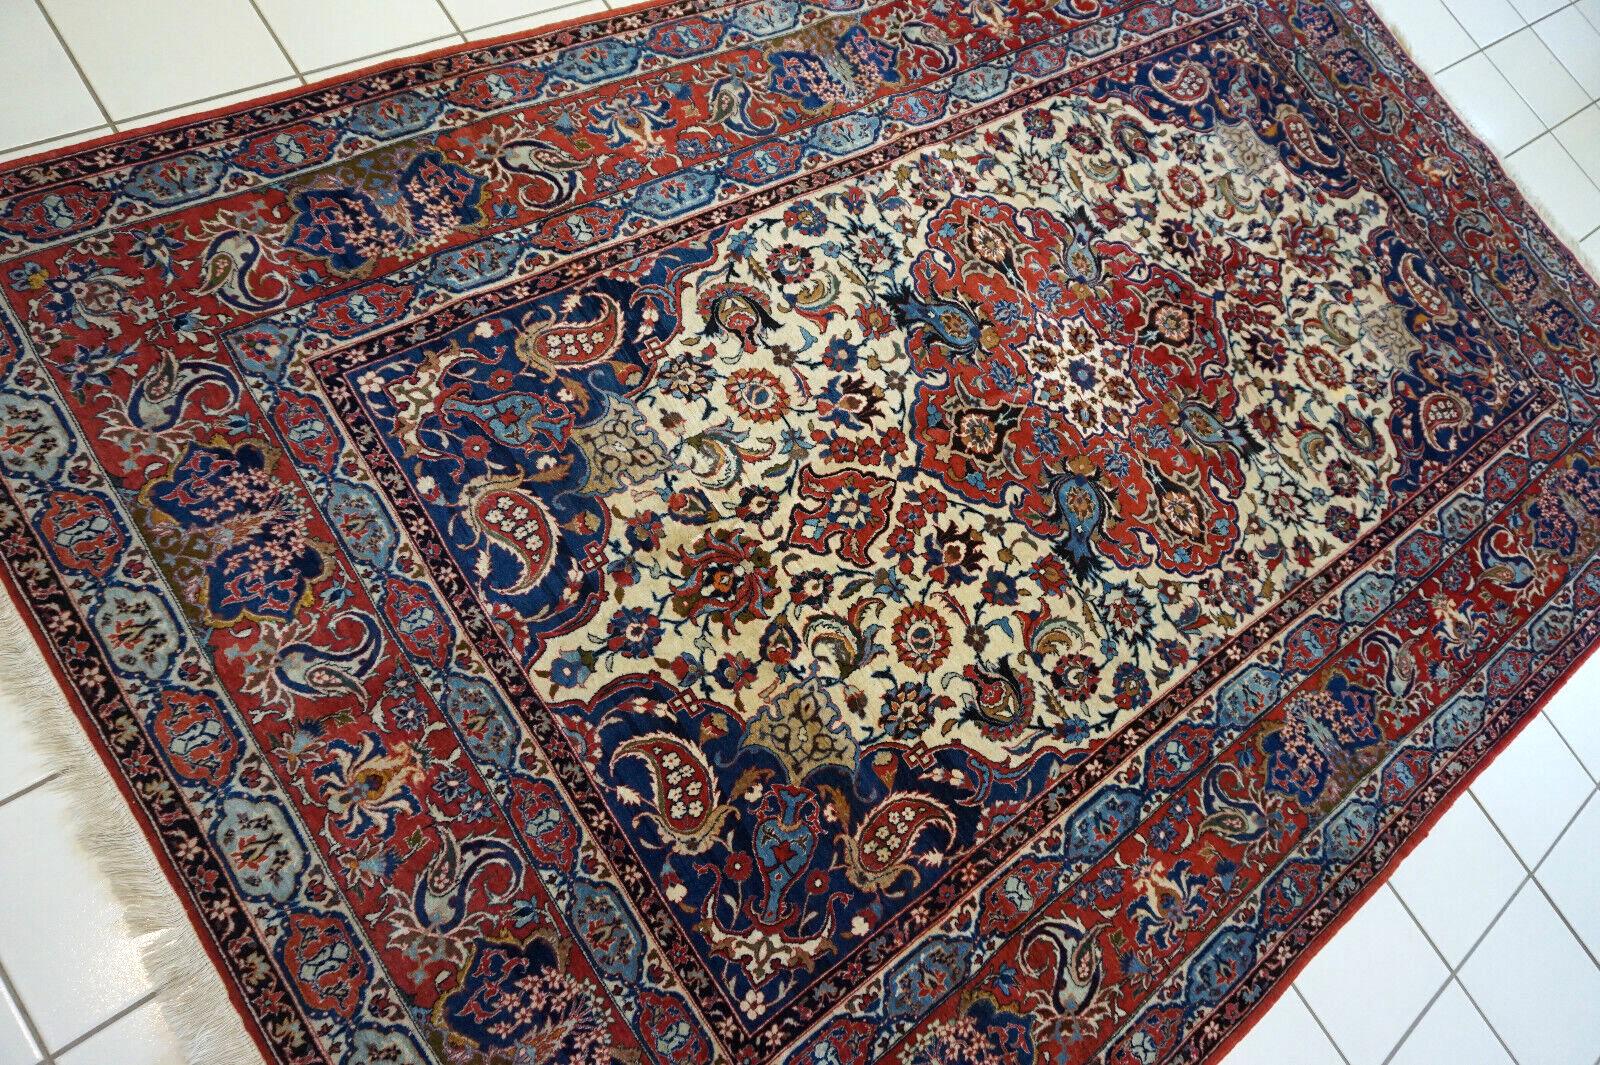 Handmade Antique Persian Style Isfahan Rug 4.5' x 7.7', 1920s - 1D53 For Sale 6